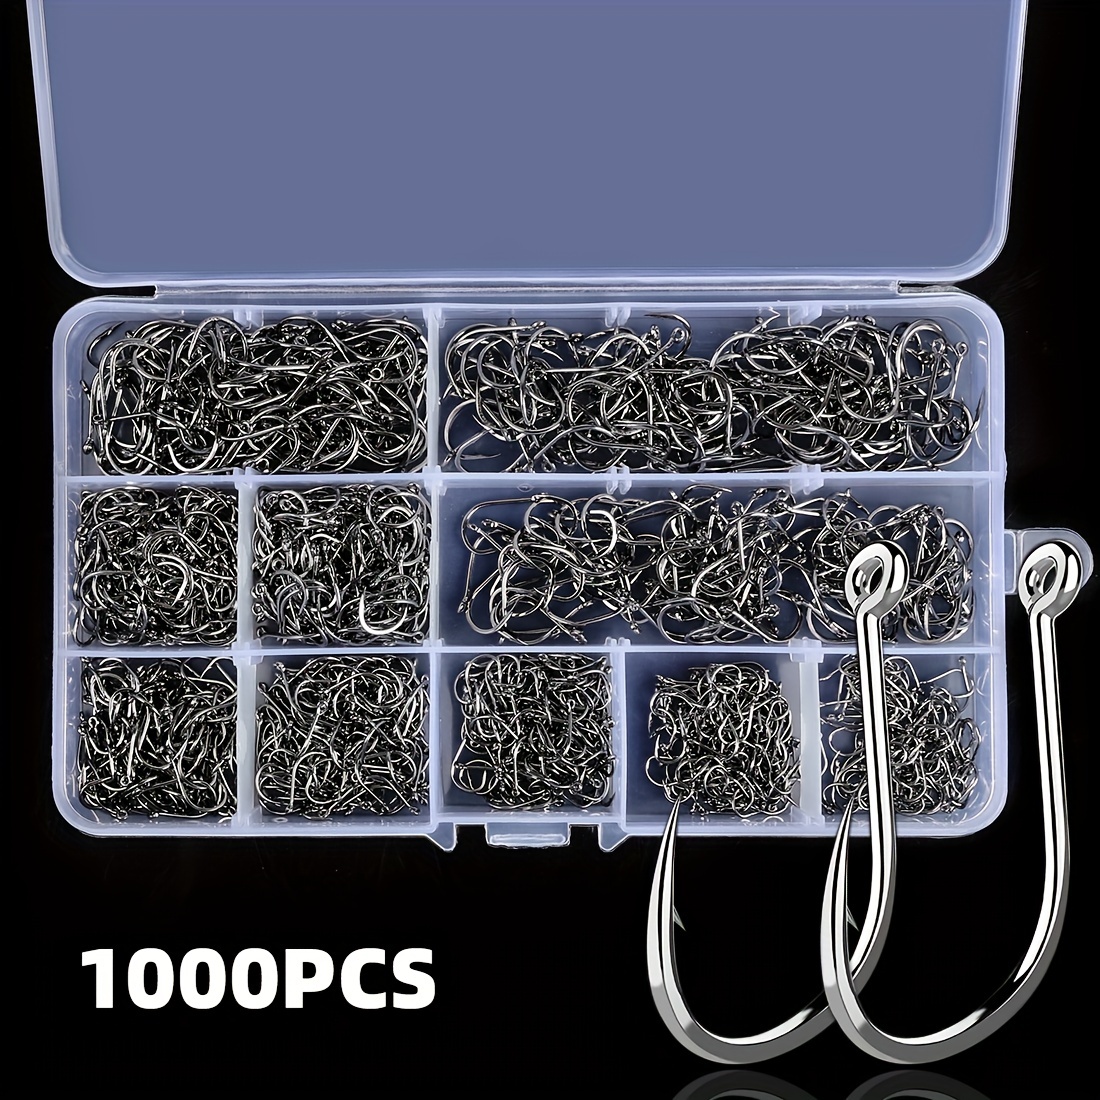 Cheap 100pcs box 10 Sizes Outdoor Fishing Strong Stainless Steel Sharp Fish  Hooks With Carry Box